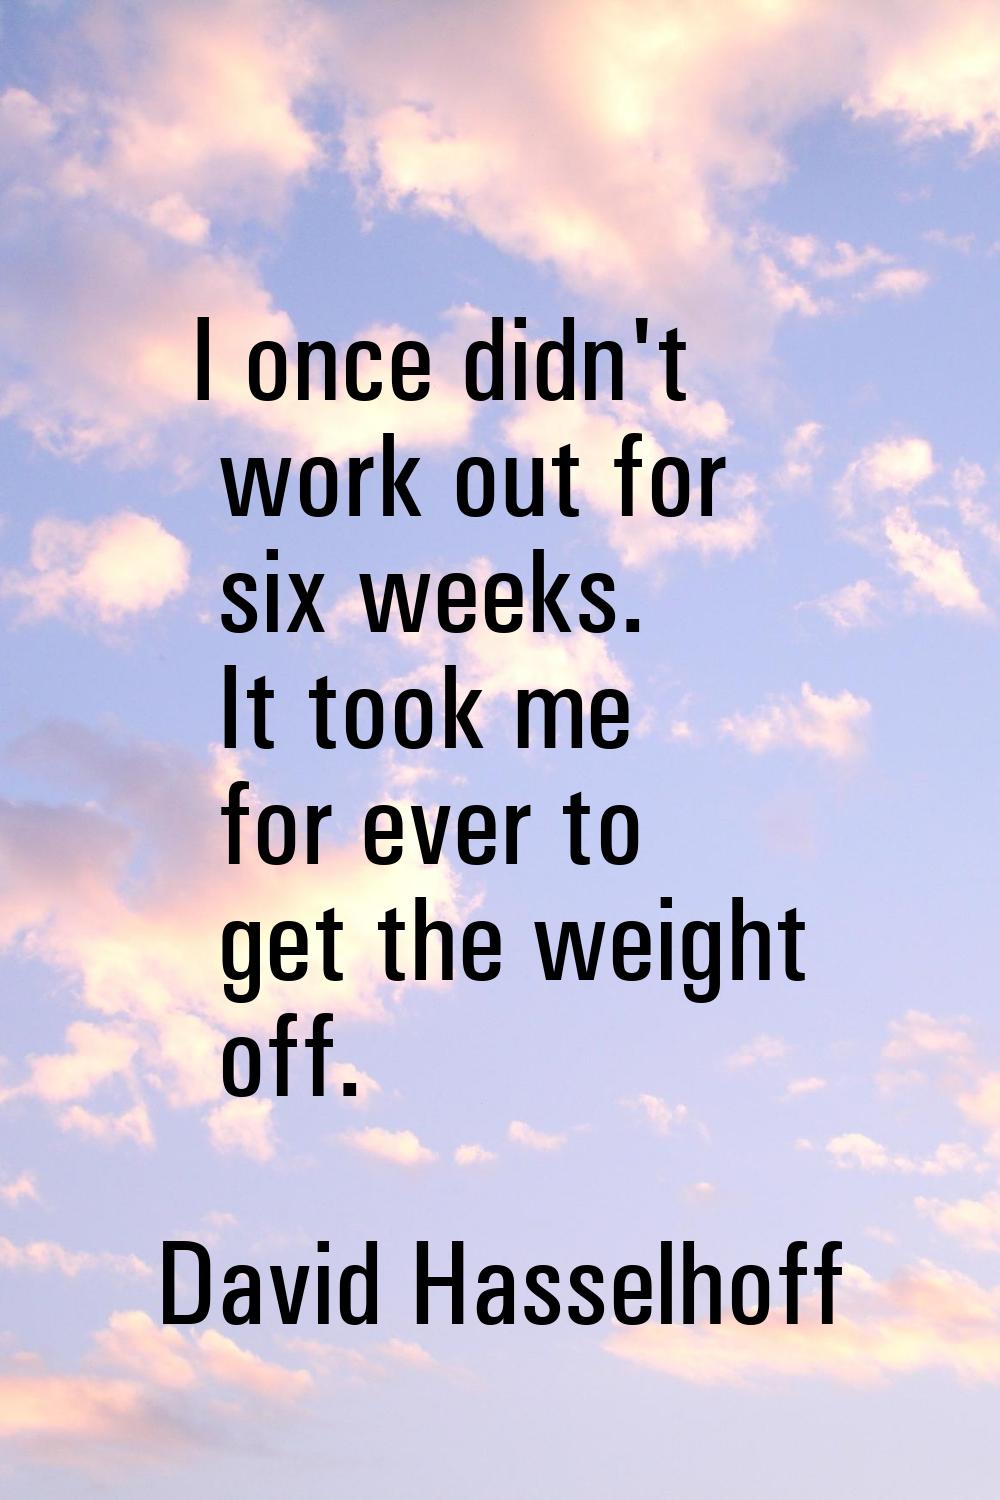 I once didn't work out for six weeks. It took me for ever to get the weight off.